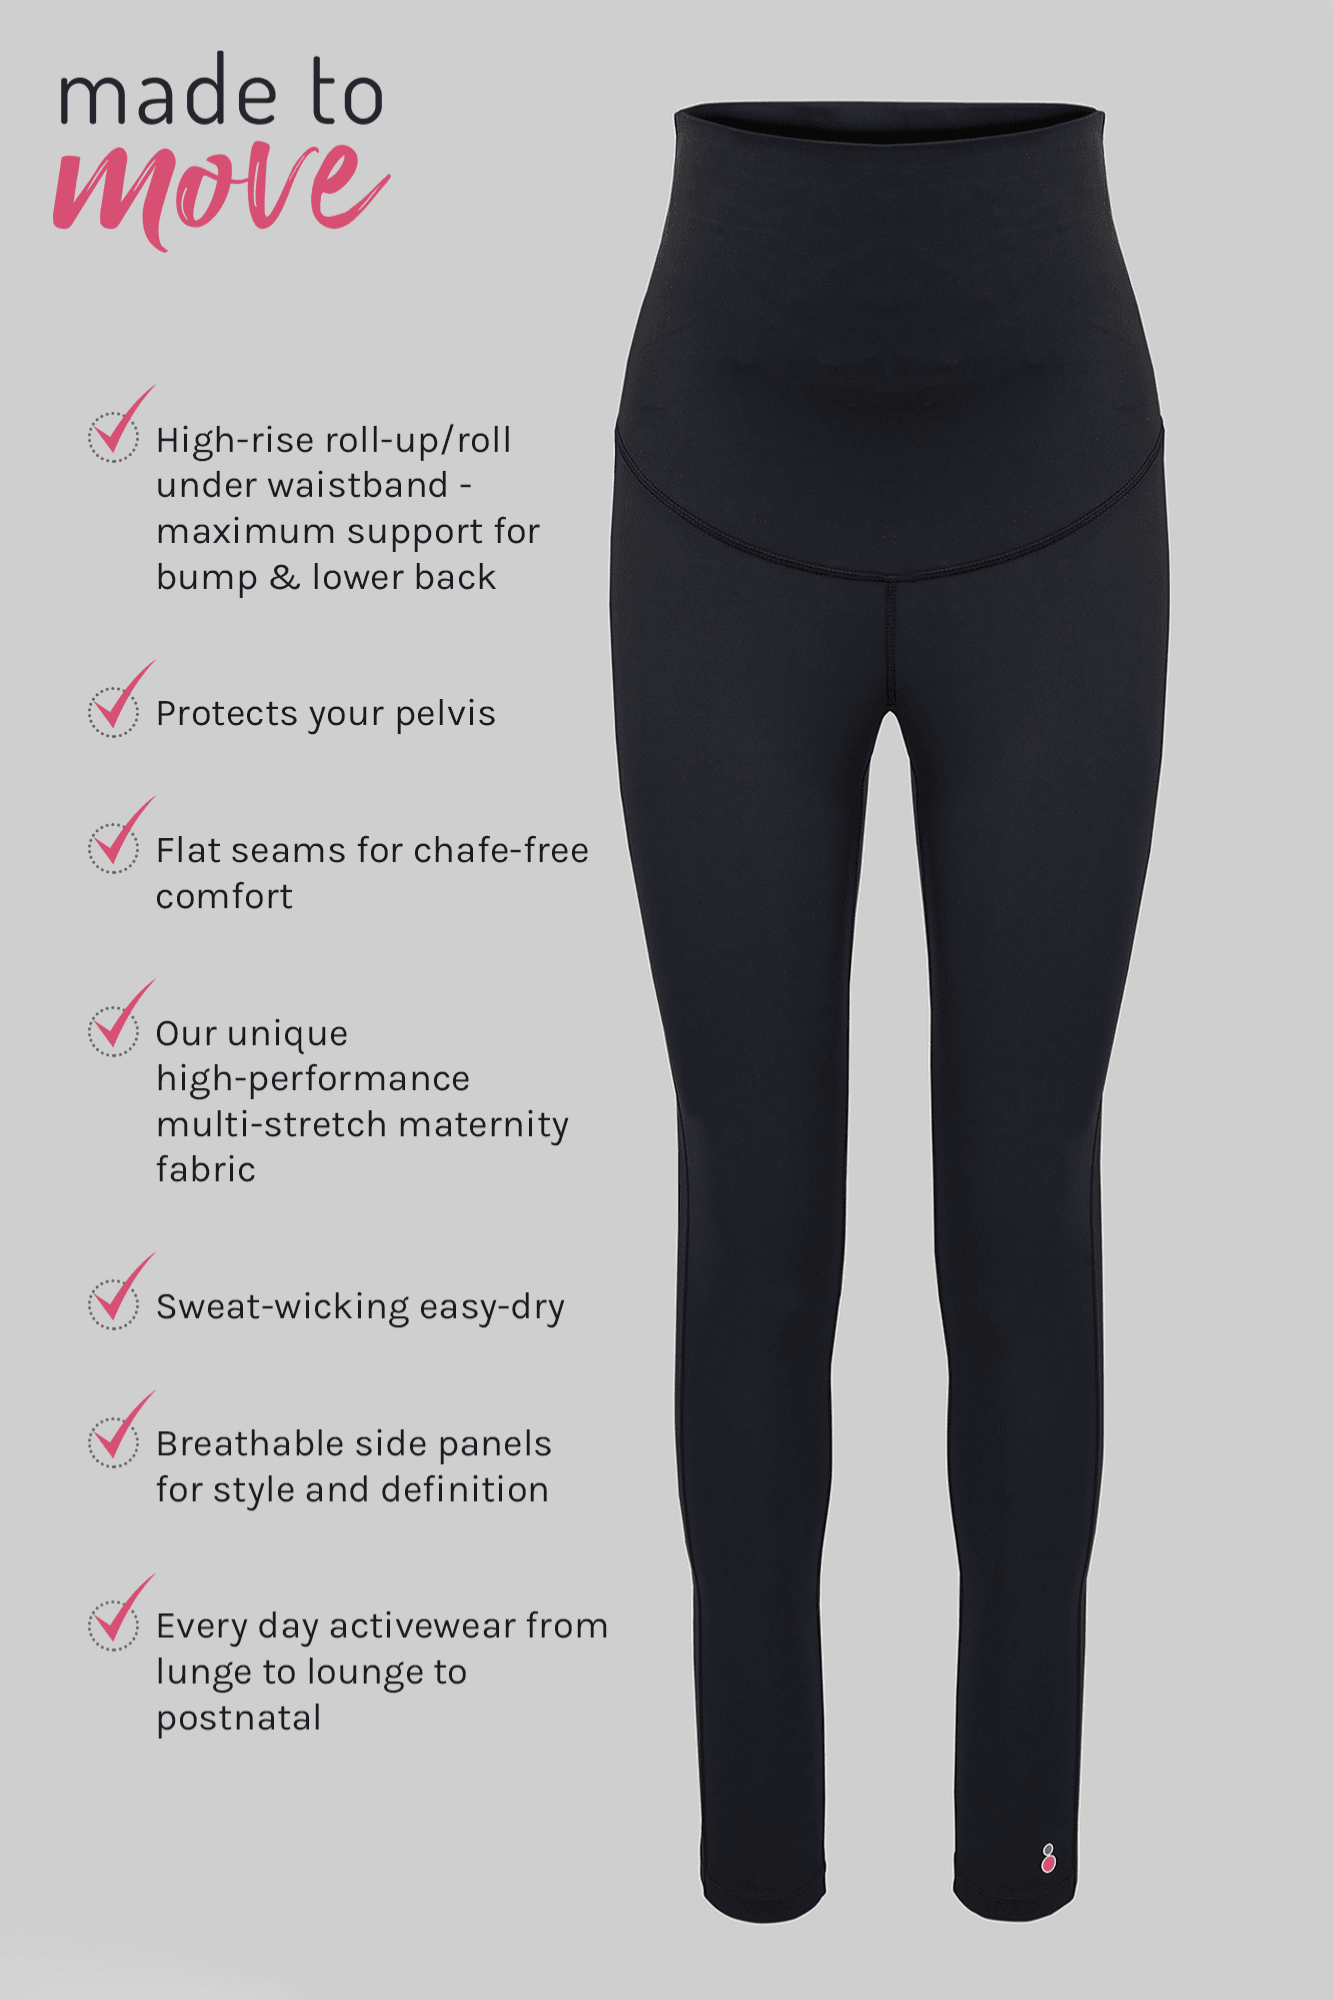 The Best Thin Leggings to Keep You Cool During Your Workout - Dona